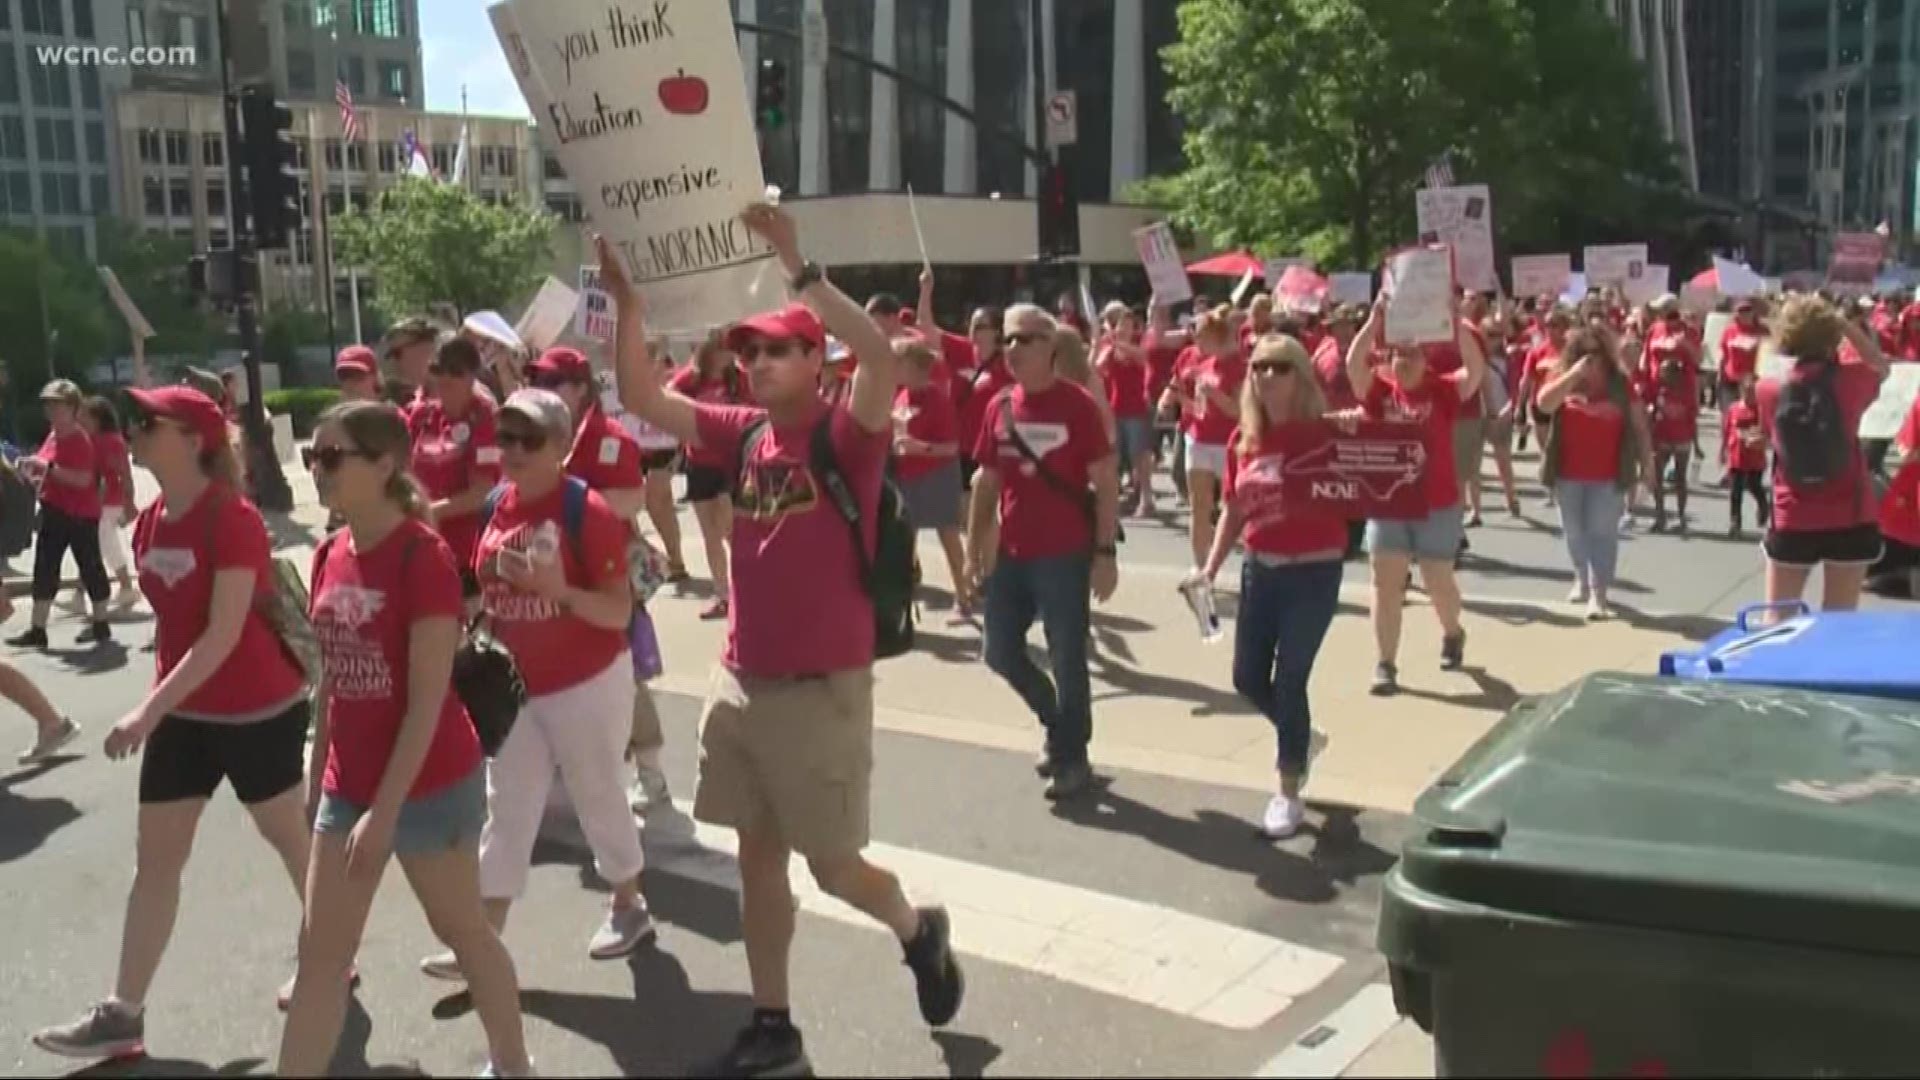 The recently unveiled proposed budget does include more money for teachers, but not as much as the House proposal. It all comes just weeks after teachers rallied at the state capitol for more resources in the classroom.